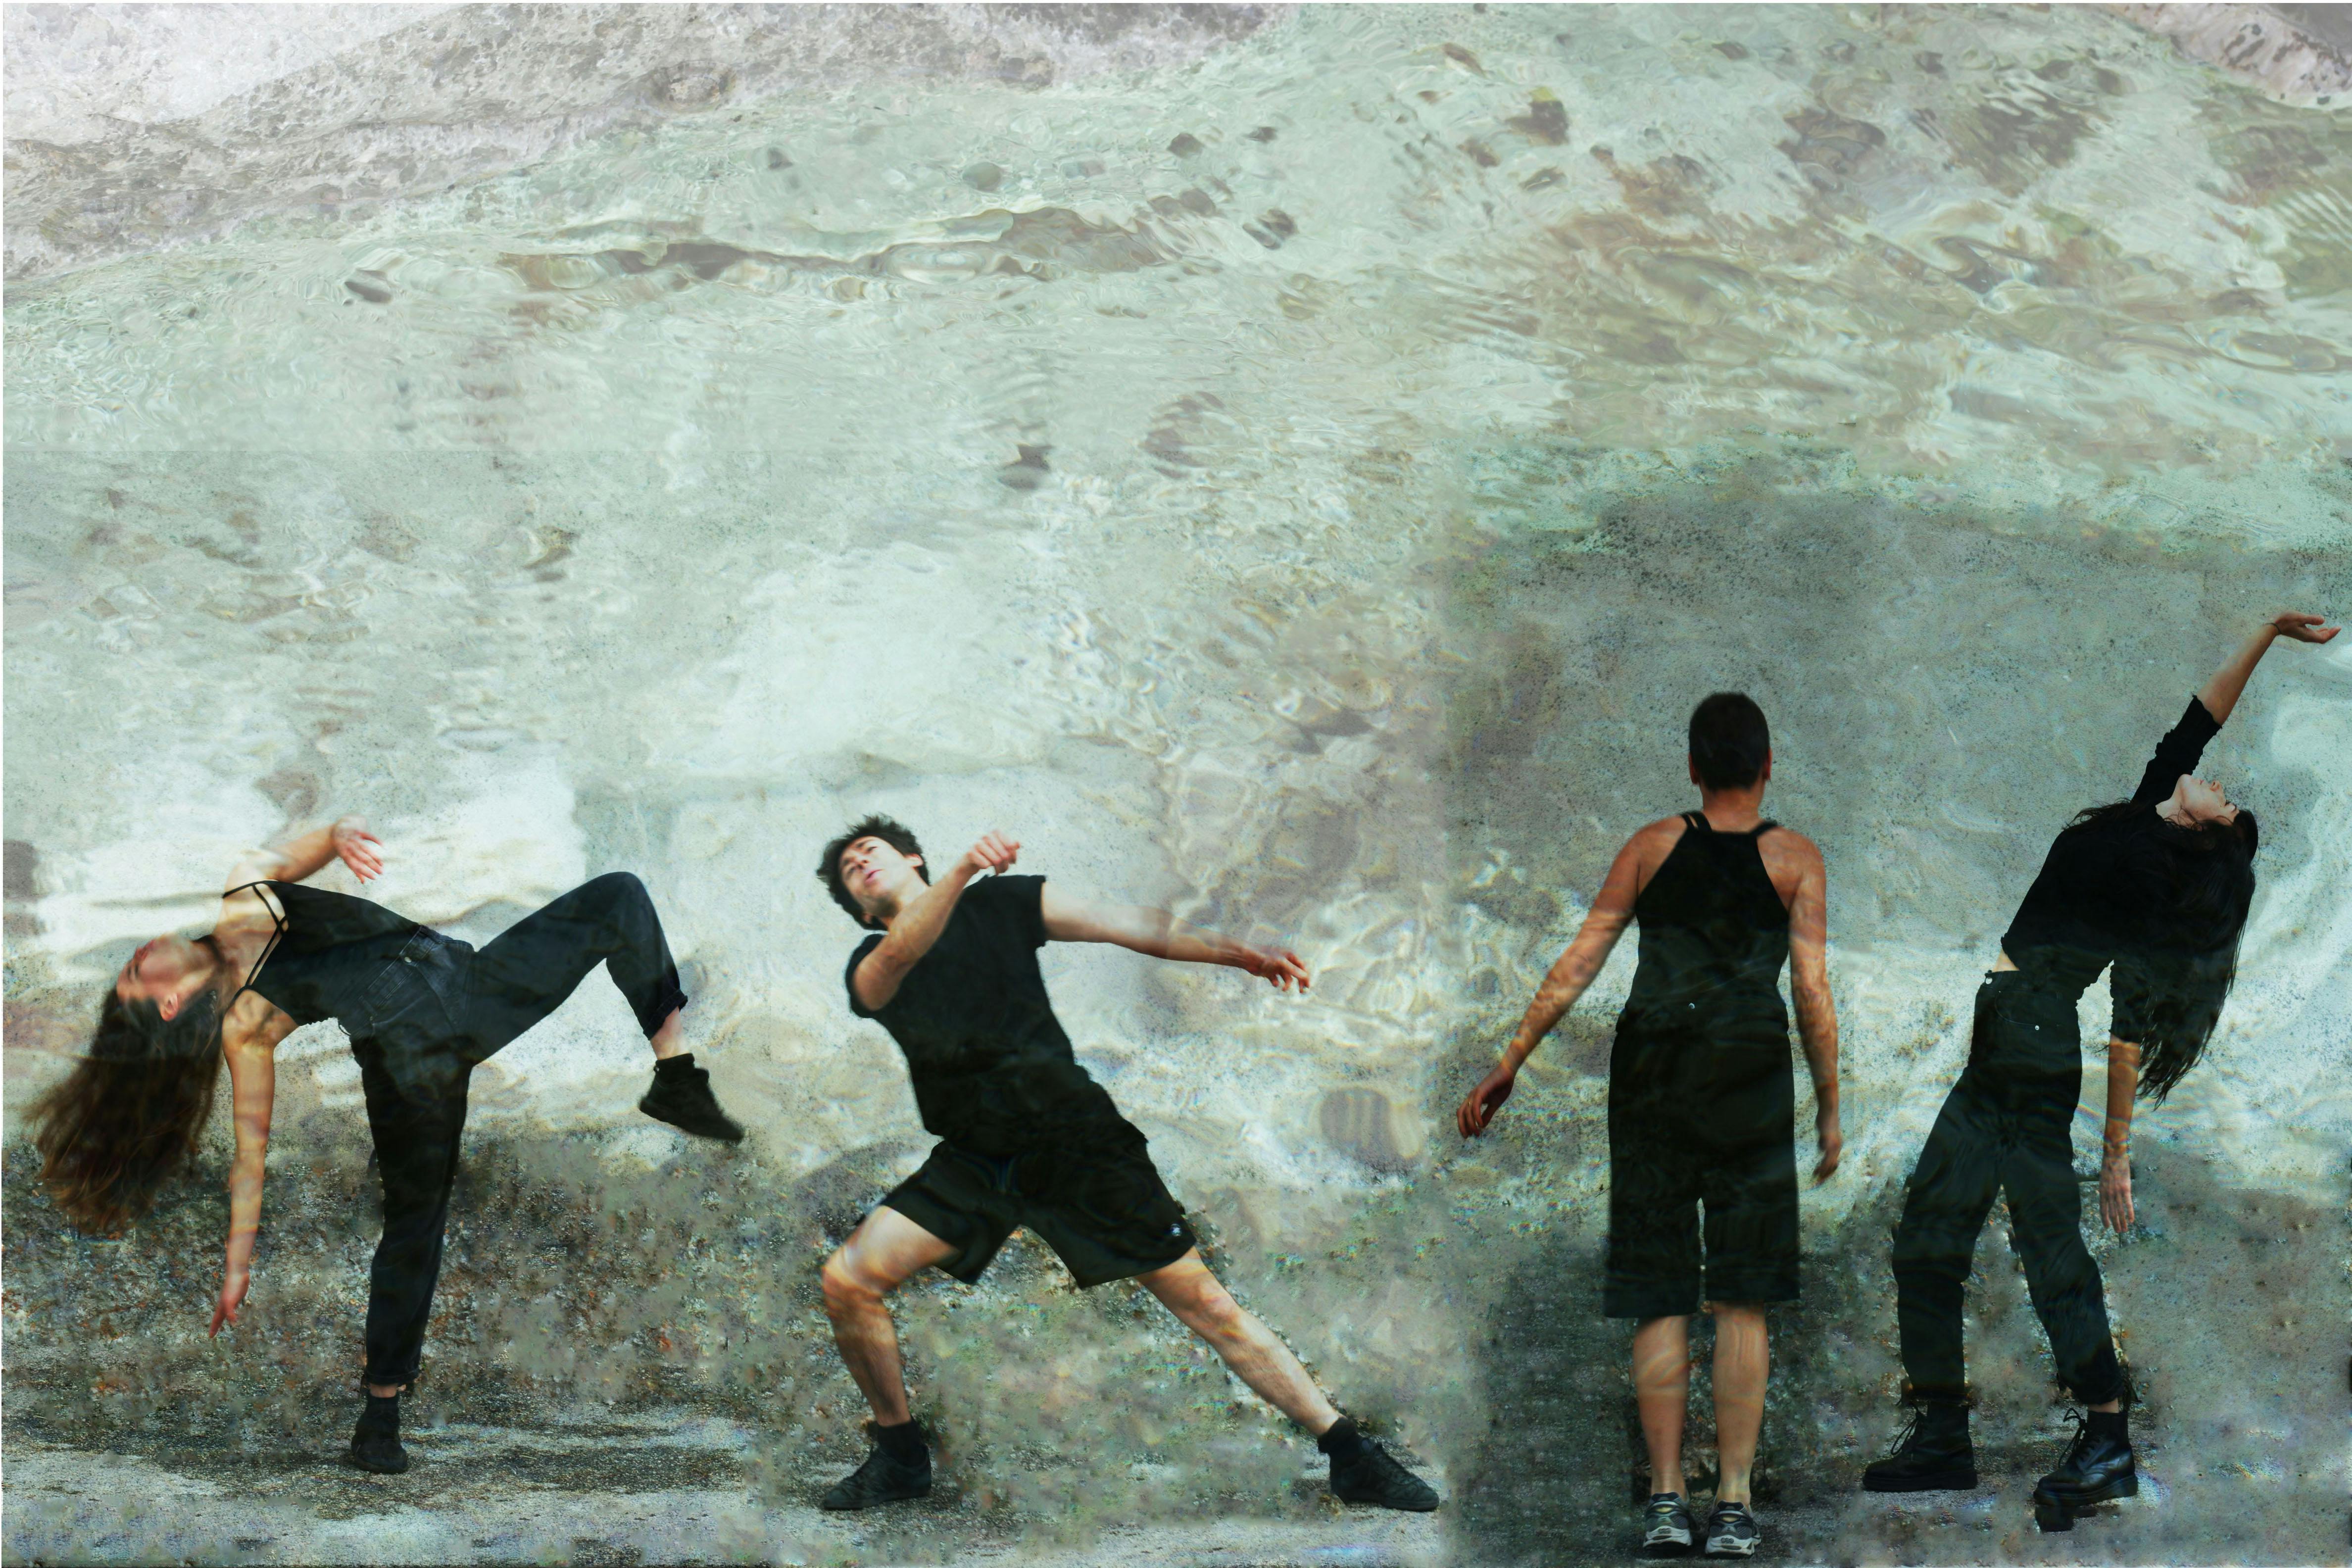 Four dancers moving - from right to left: two in a frontal position, one from the back and one from the side - with a background imitating the reflection of water